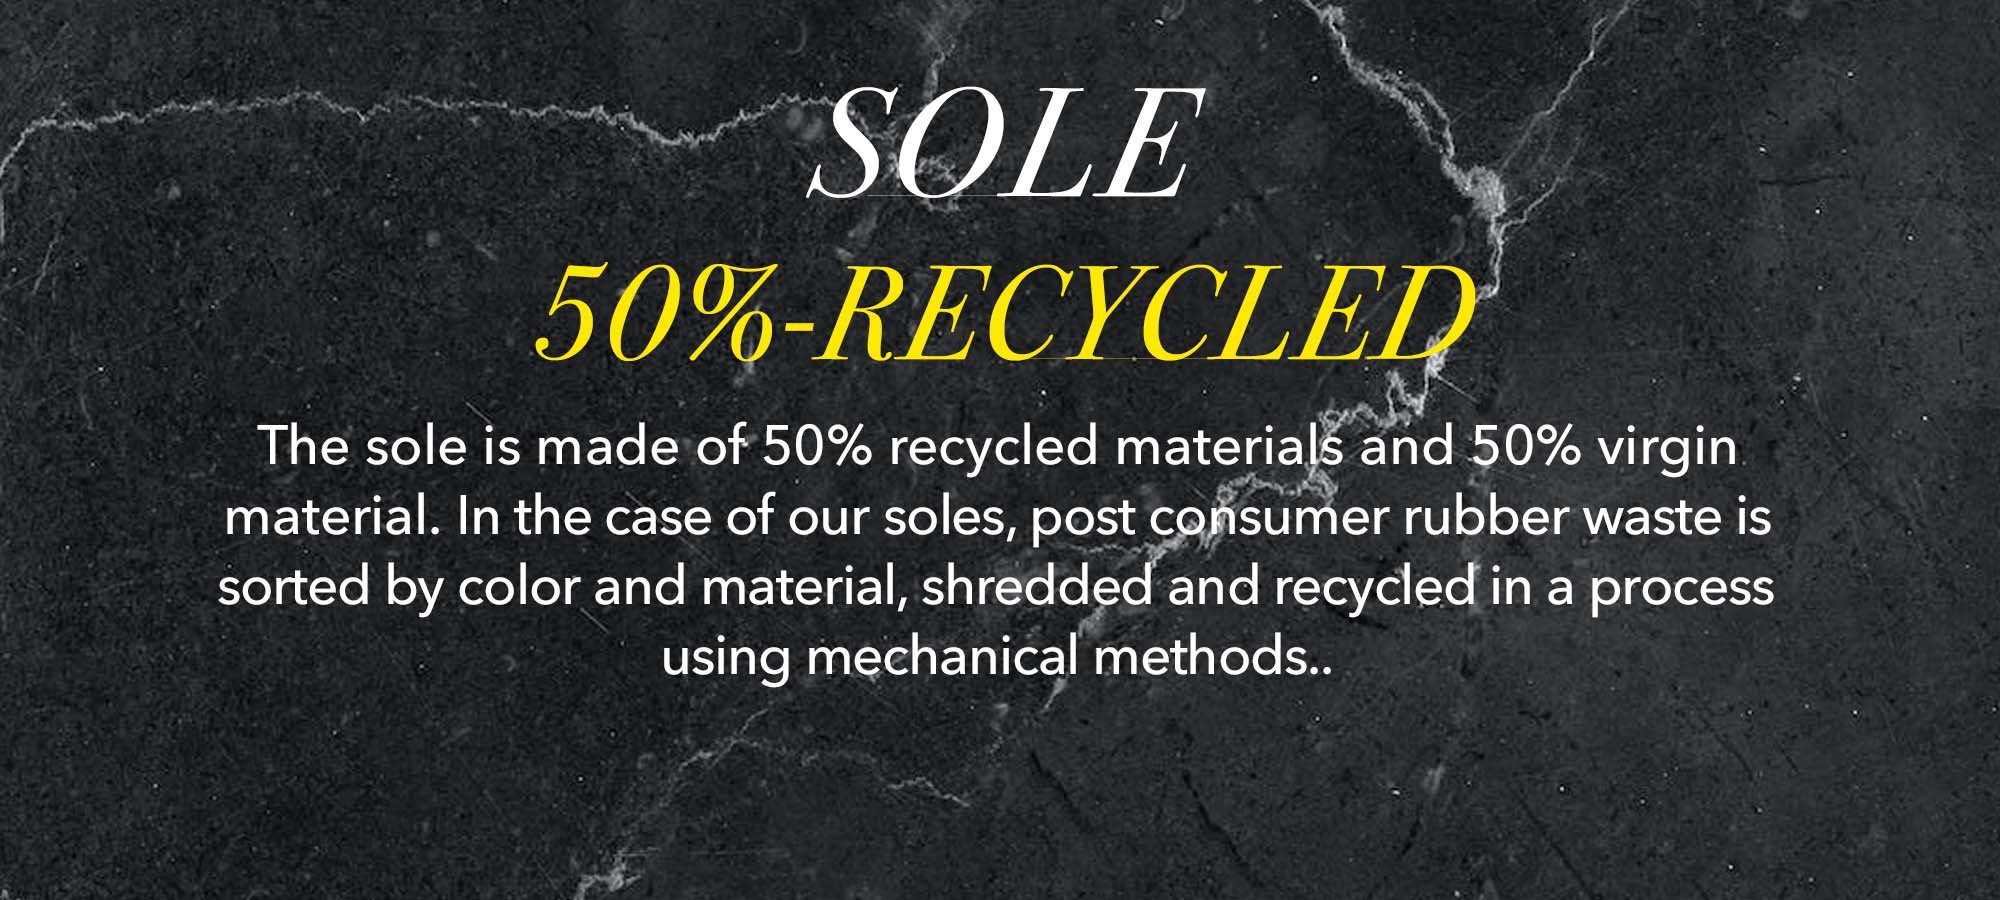 SOLE 50%-RECYCLED